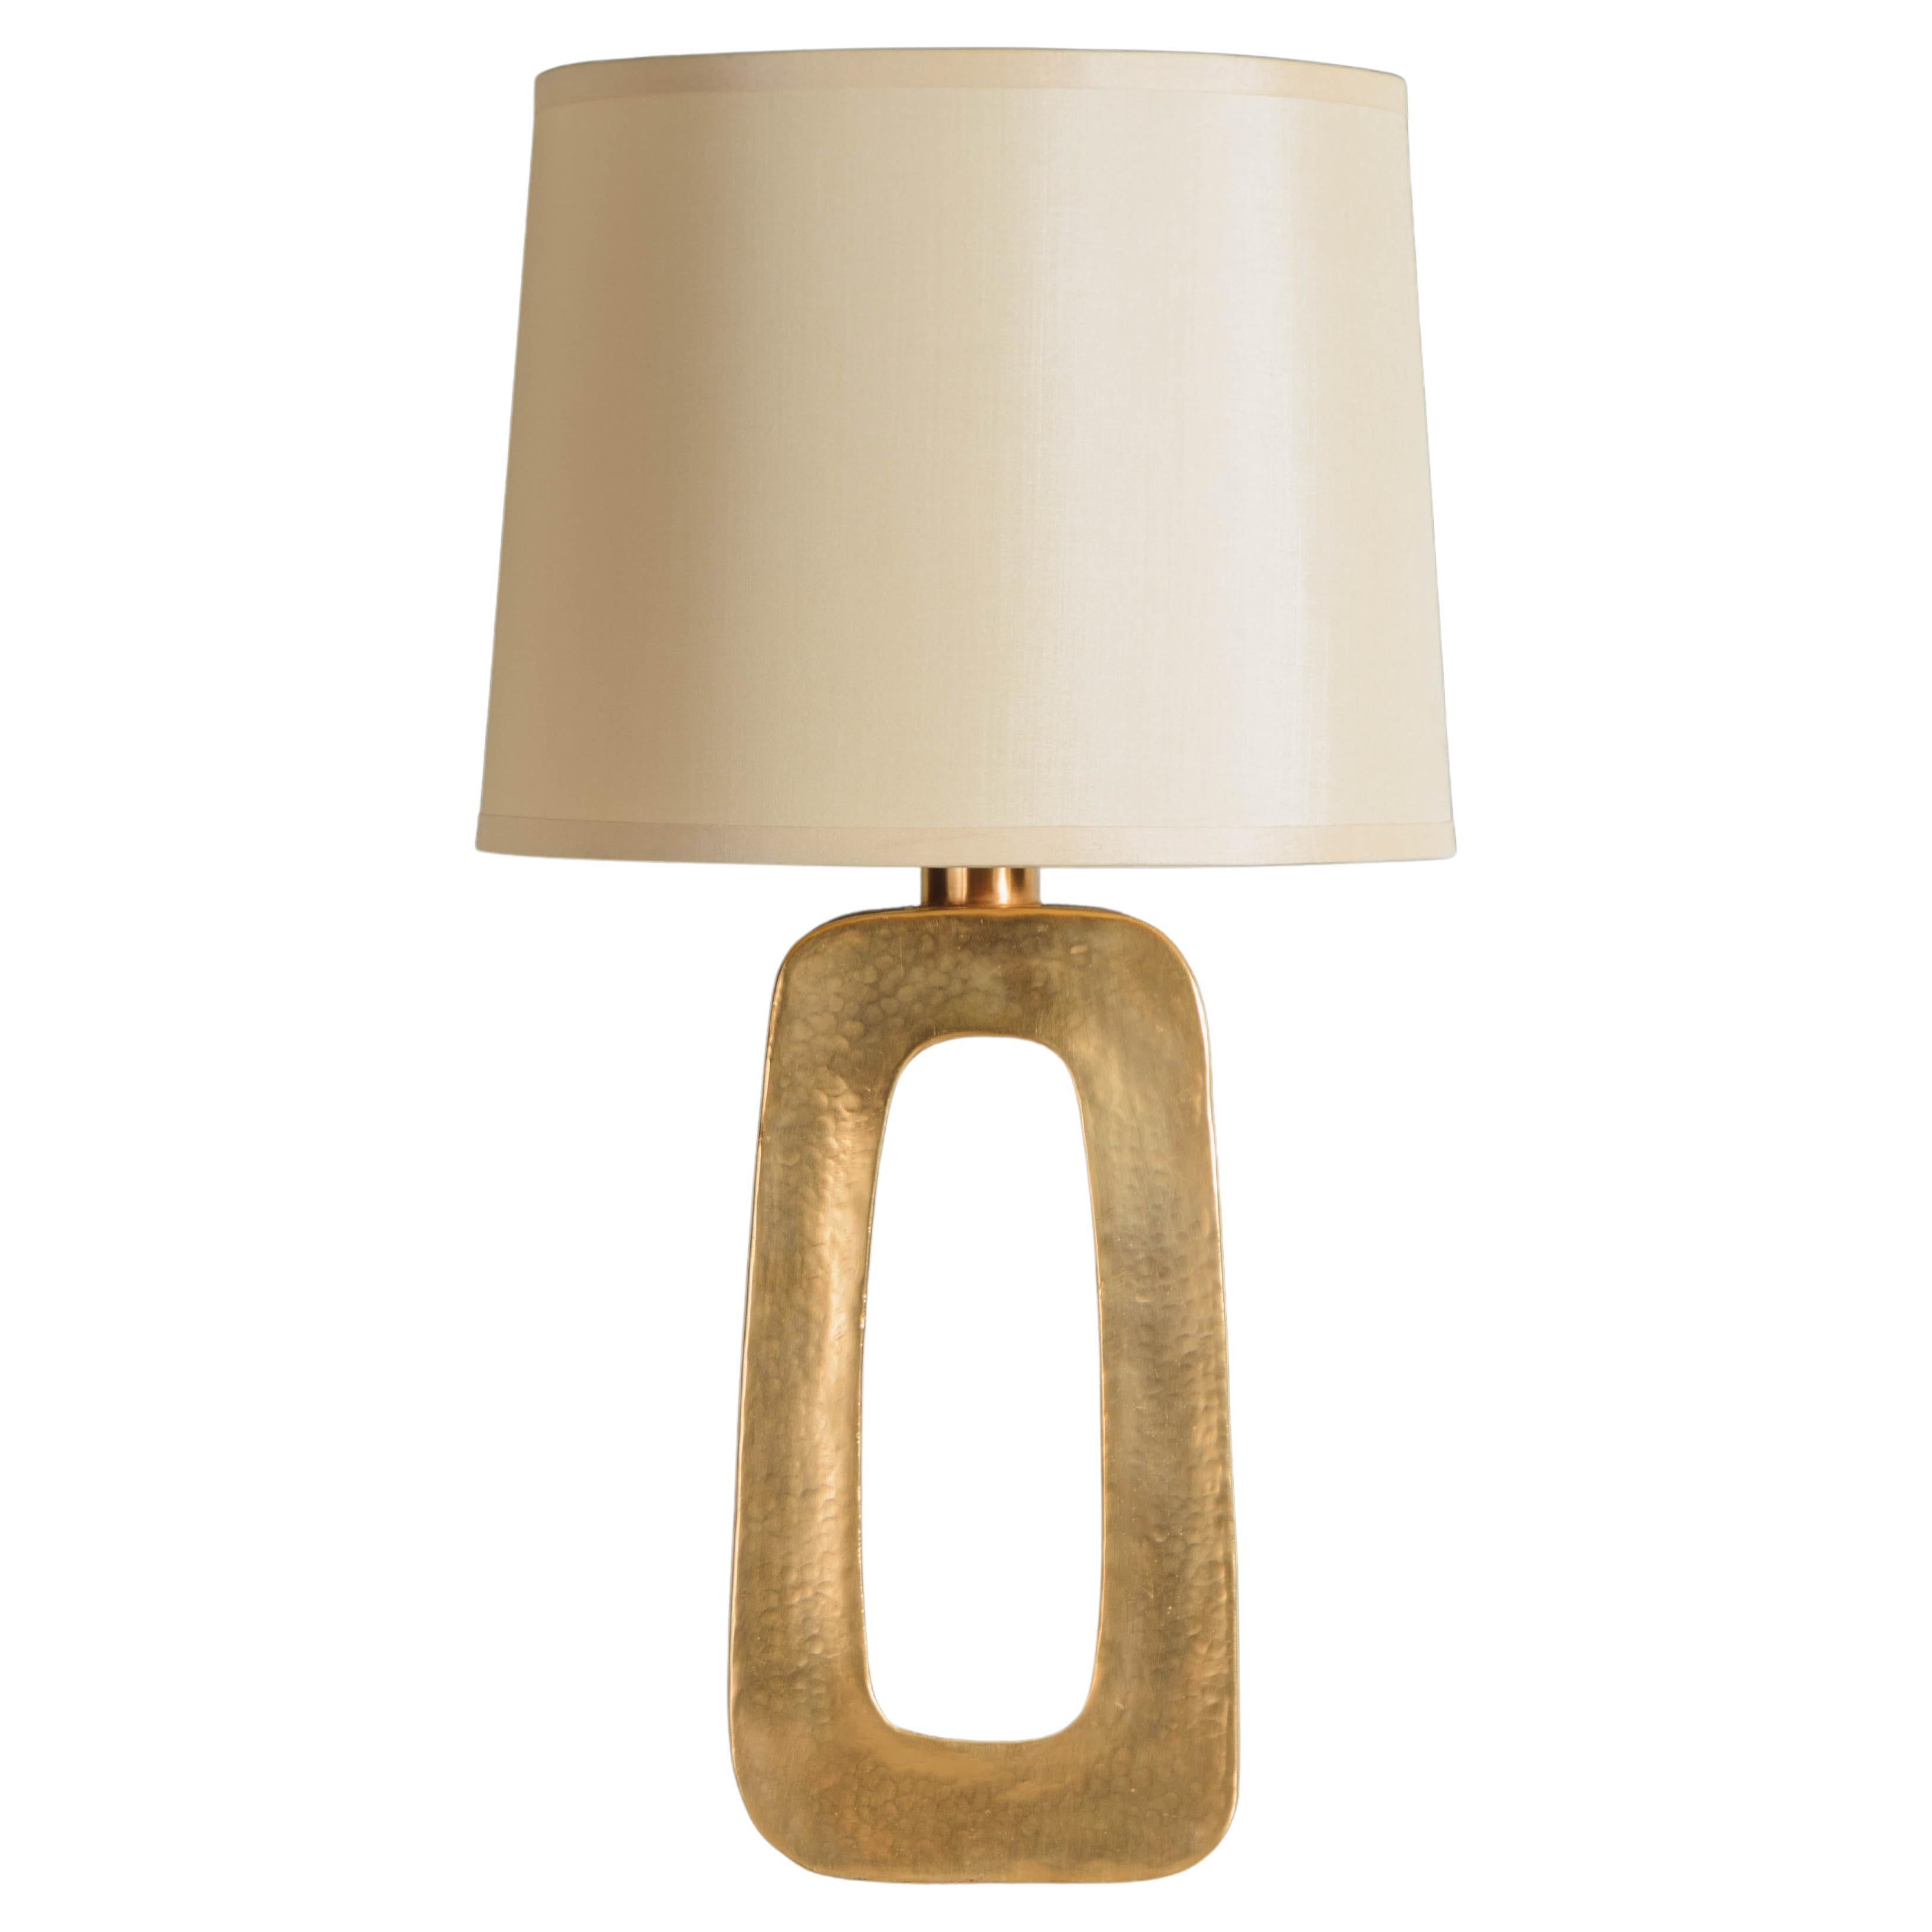 Contemporary "O" Table Lamp in 24K Gold Plate by Robert Kuo, Hand Repoussé For Sale